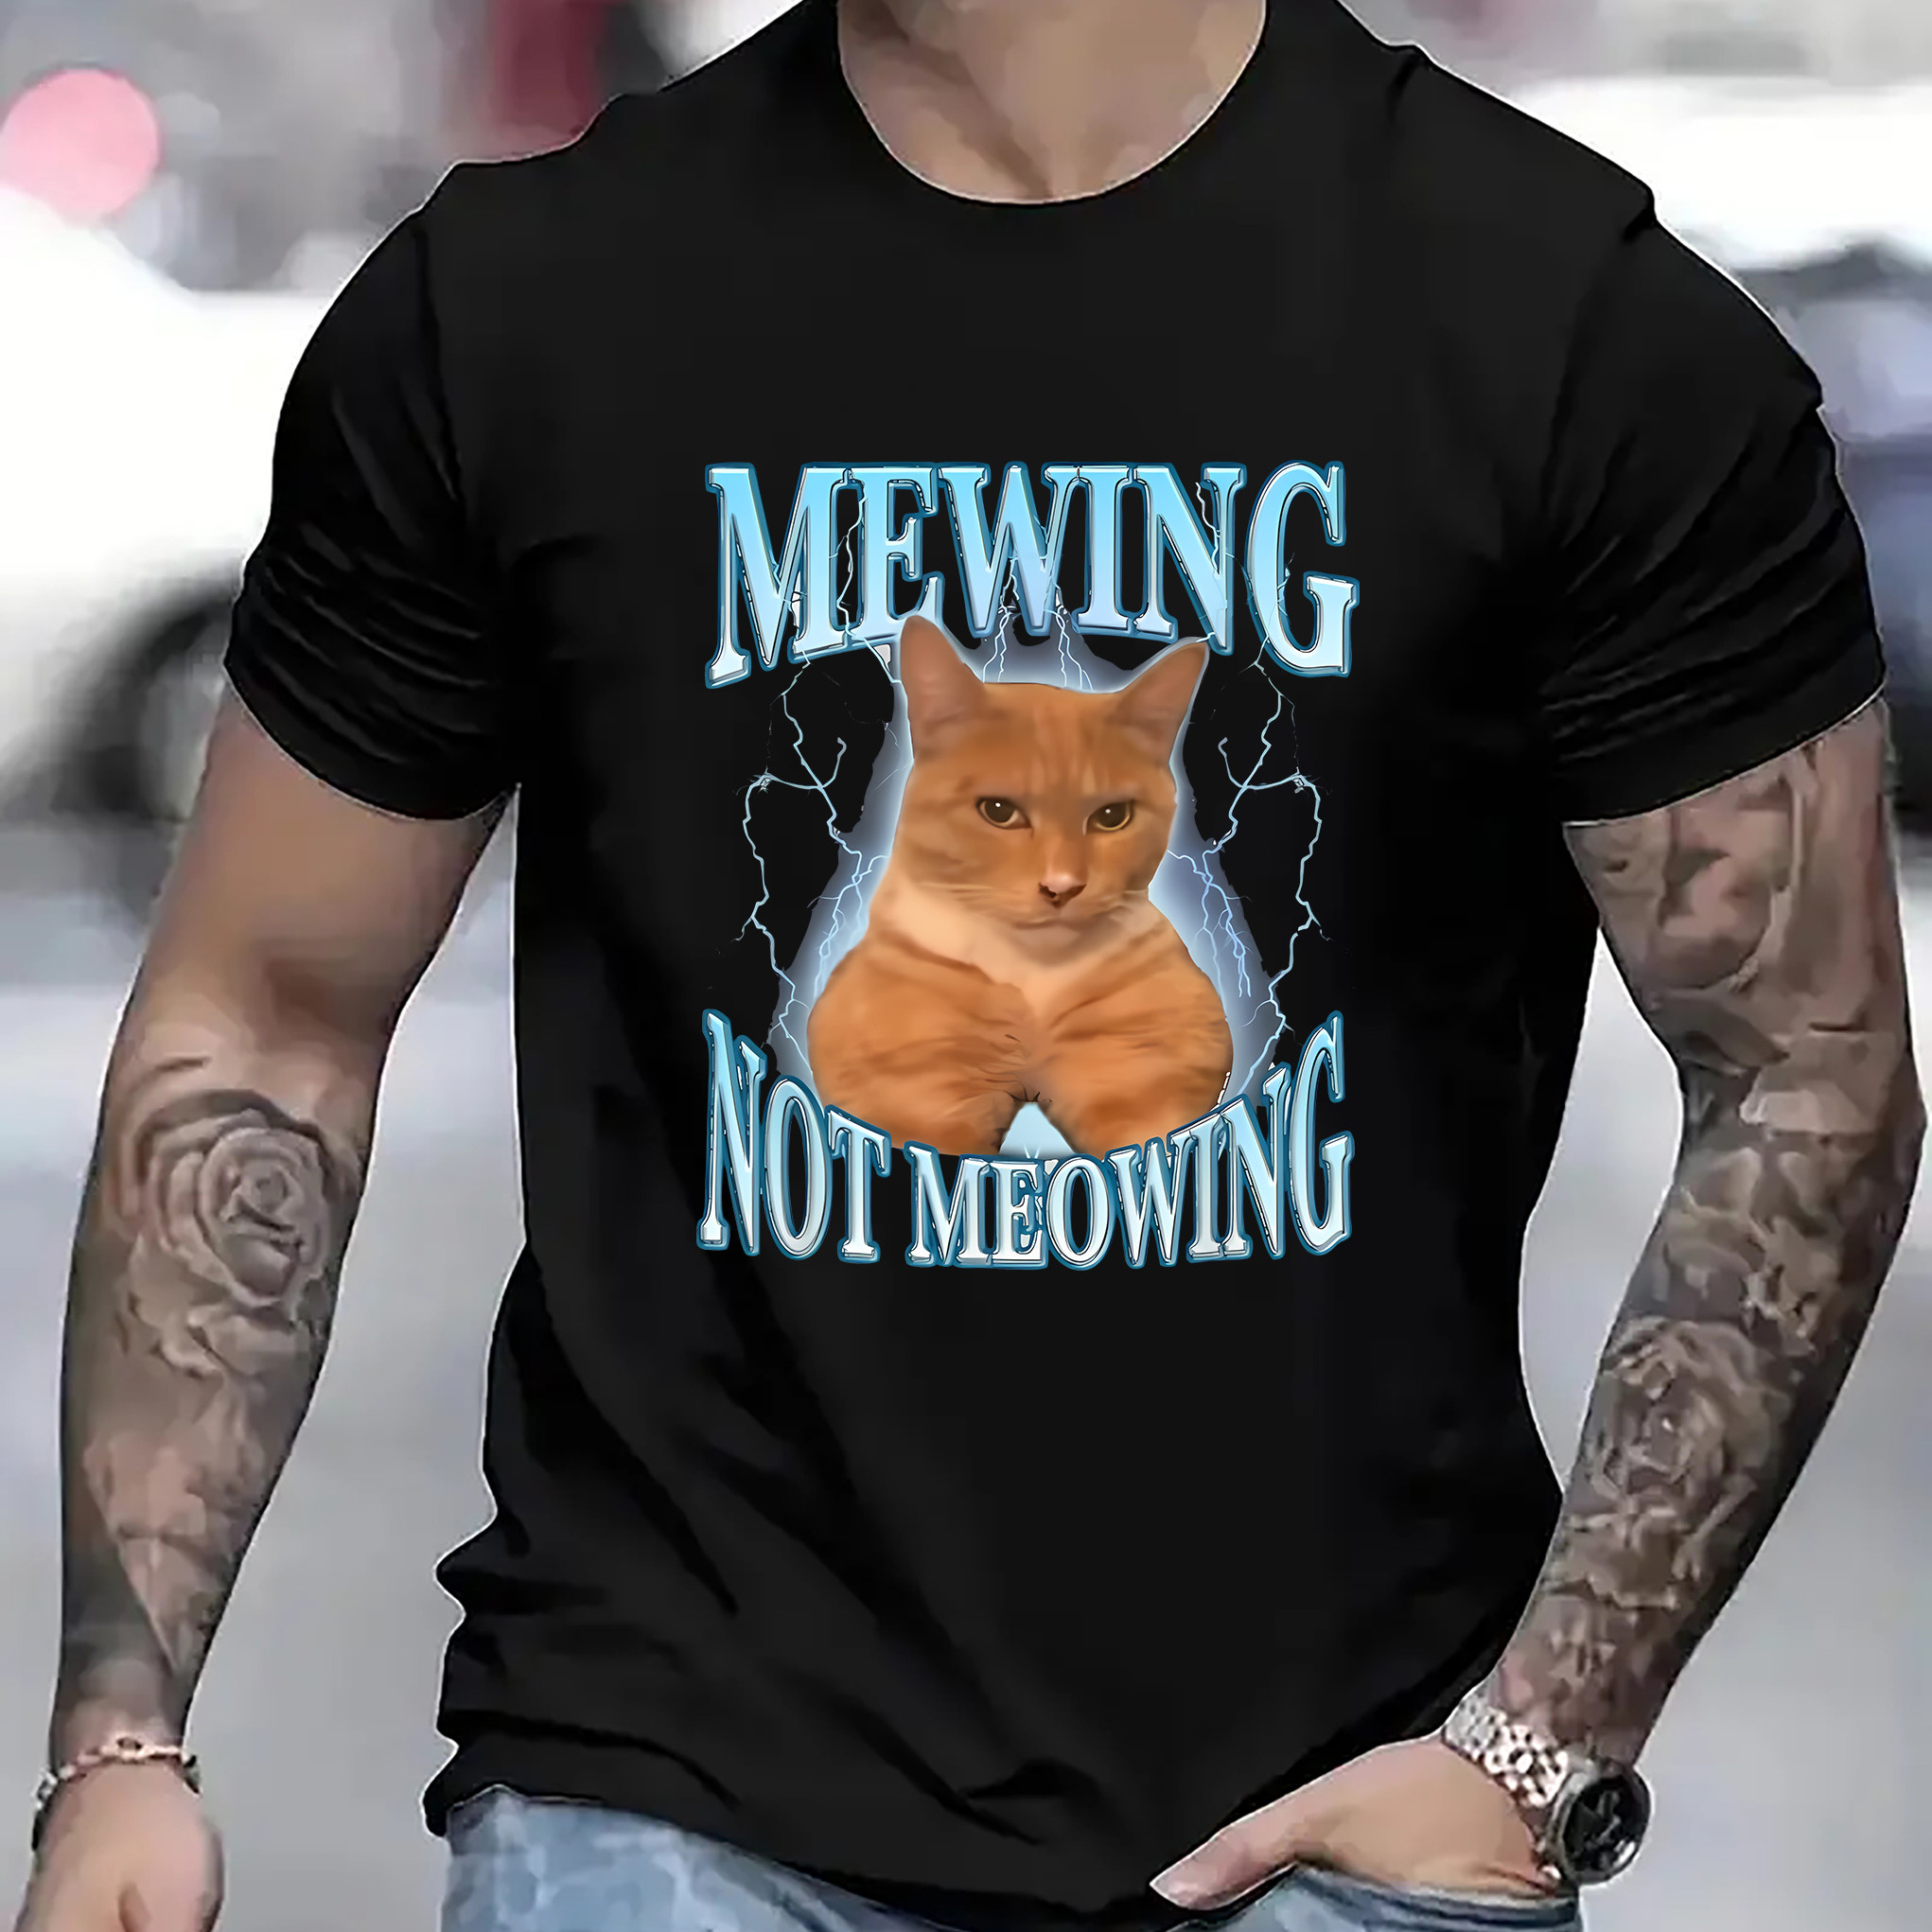 

Funny Cat Pattern Letters Print Men's Fashion Comfy Breathable T-shirt, New Casual Round Neck Short Sleeve Lightweight Tee For Spring Summer Holiday Leisure Vacation Men's Clothing As Gift